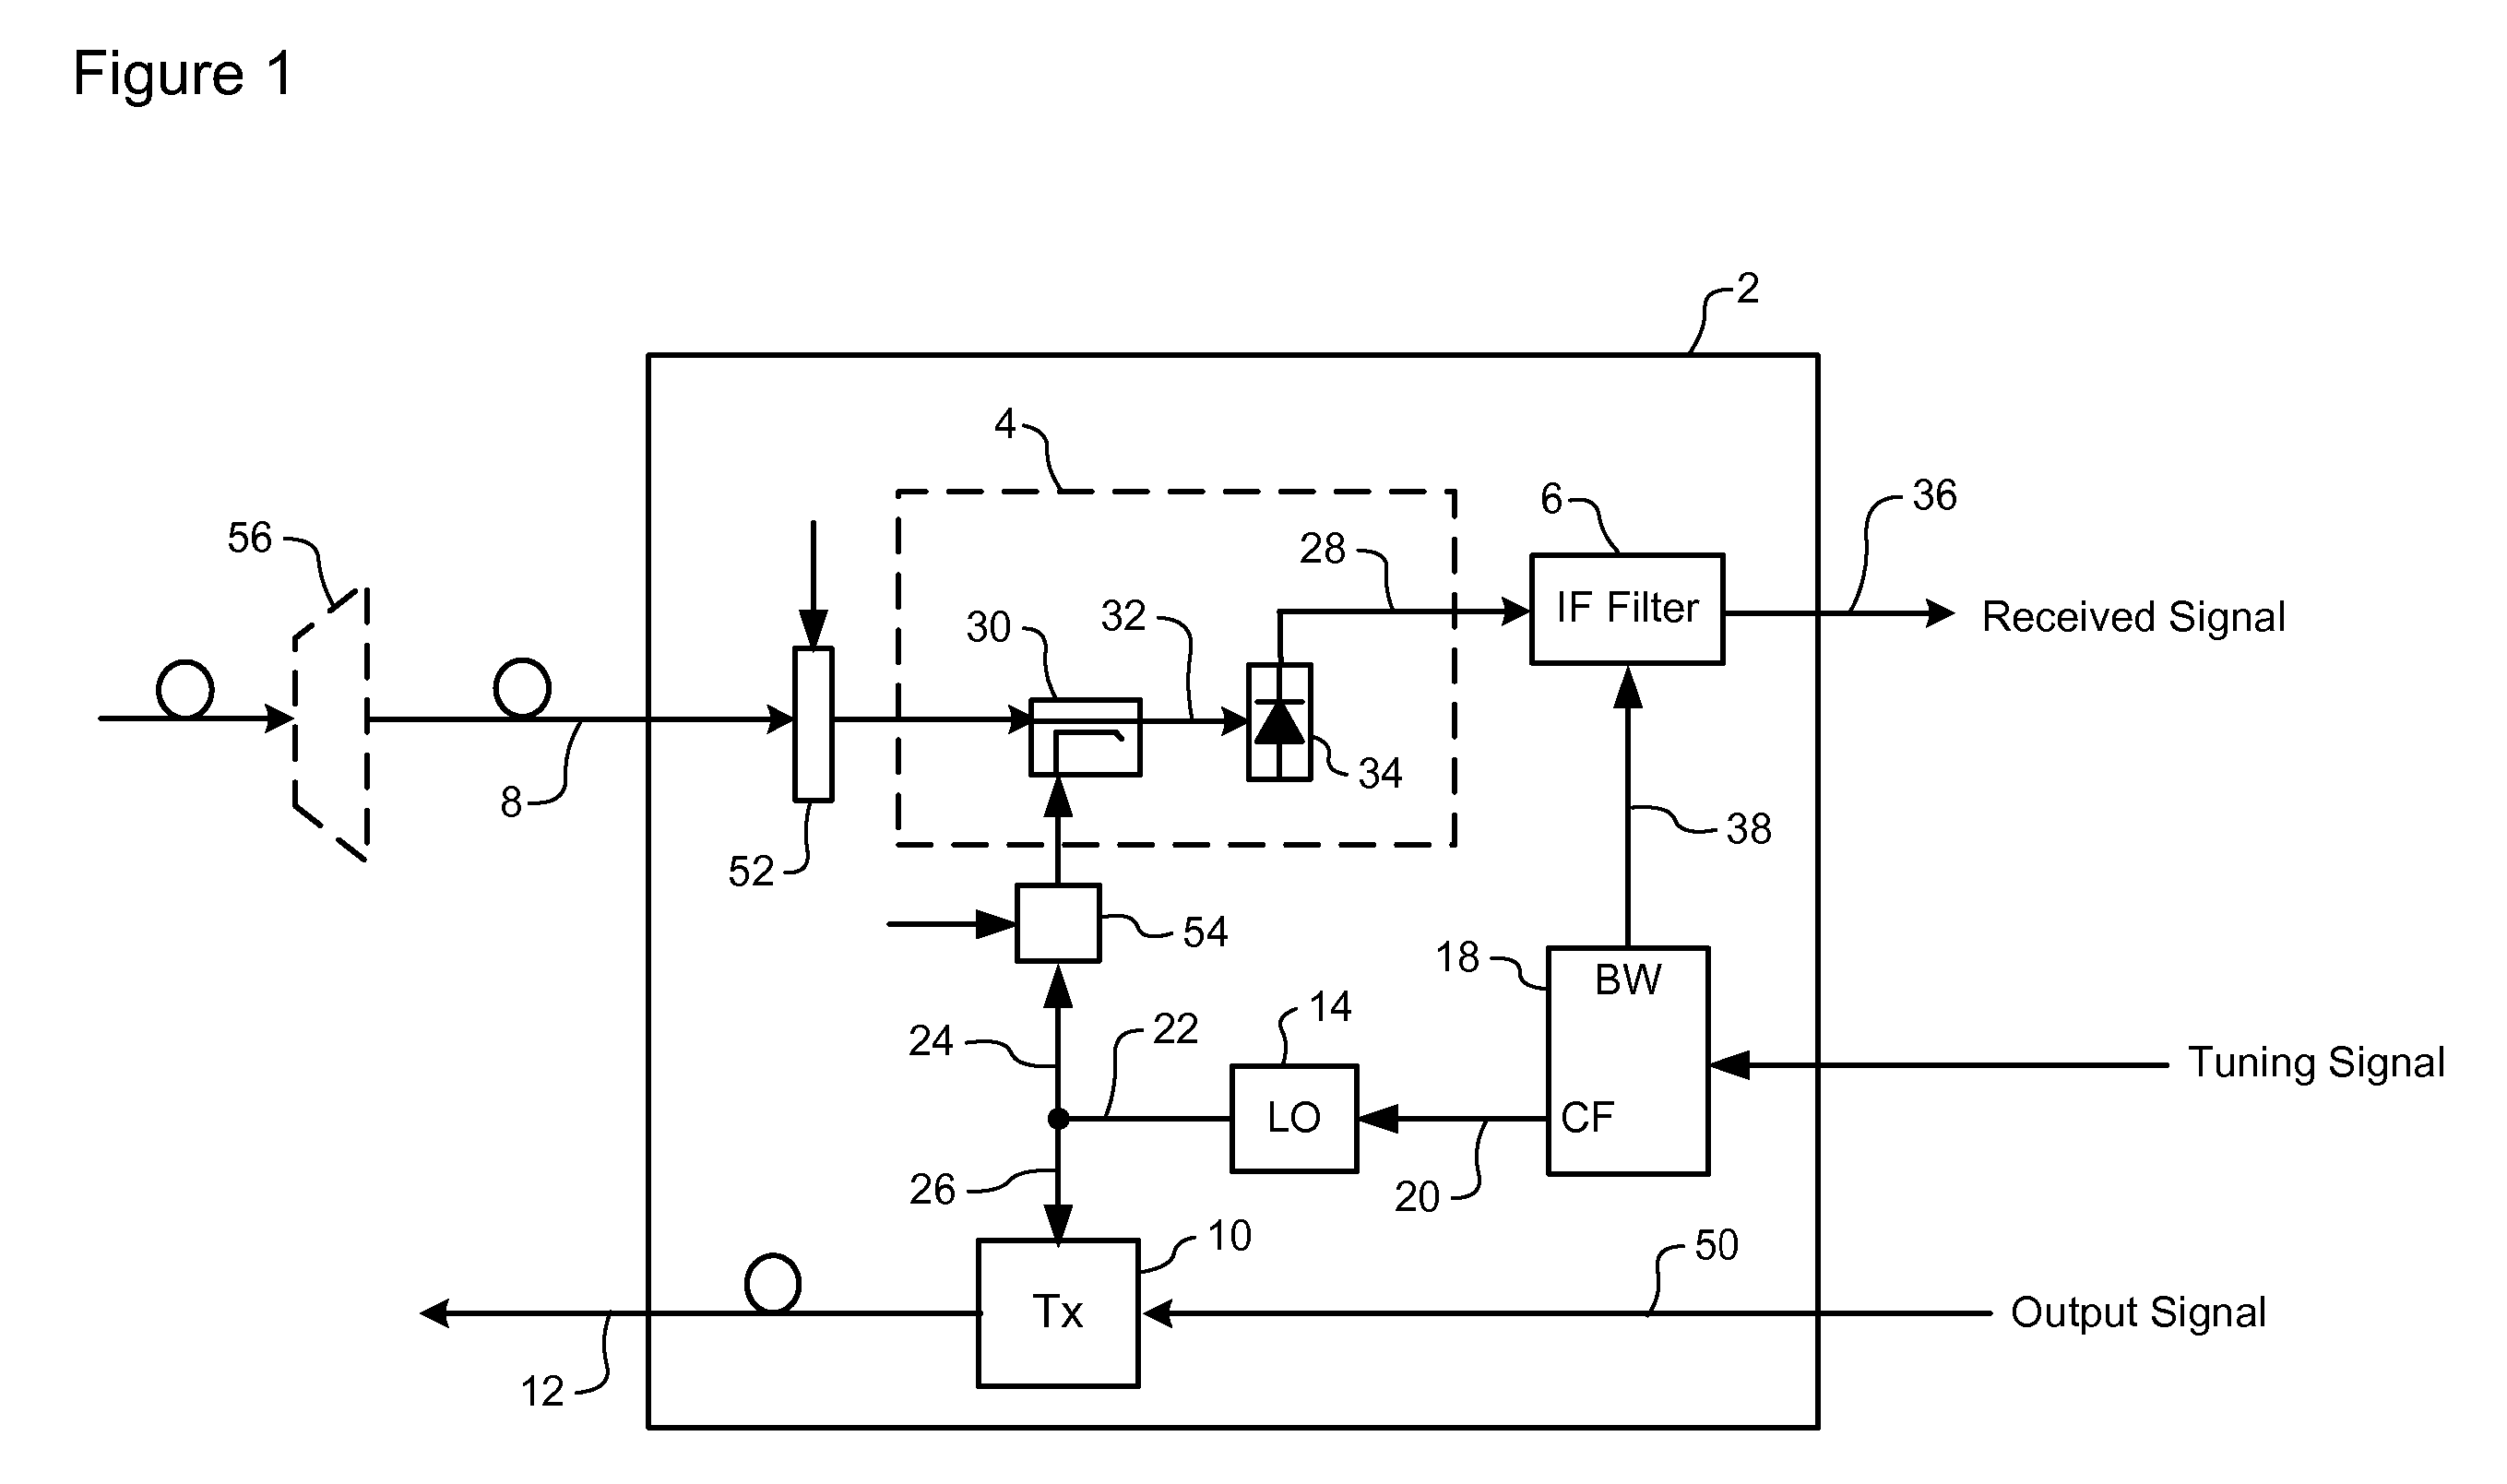 Frequency agile transmitter and receiver architecture for dwdm systems